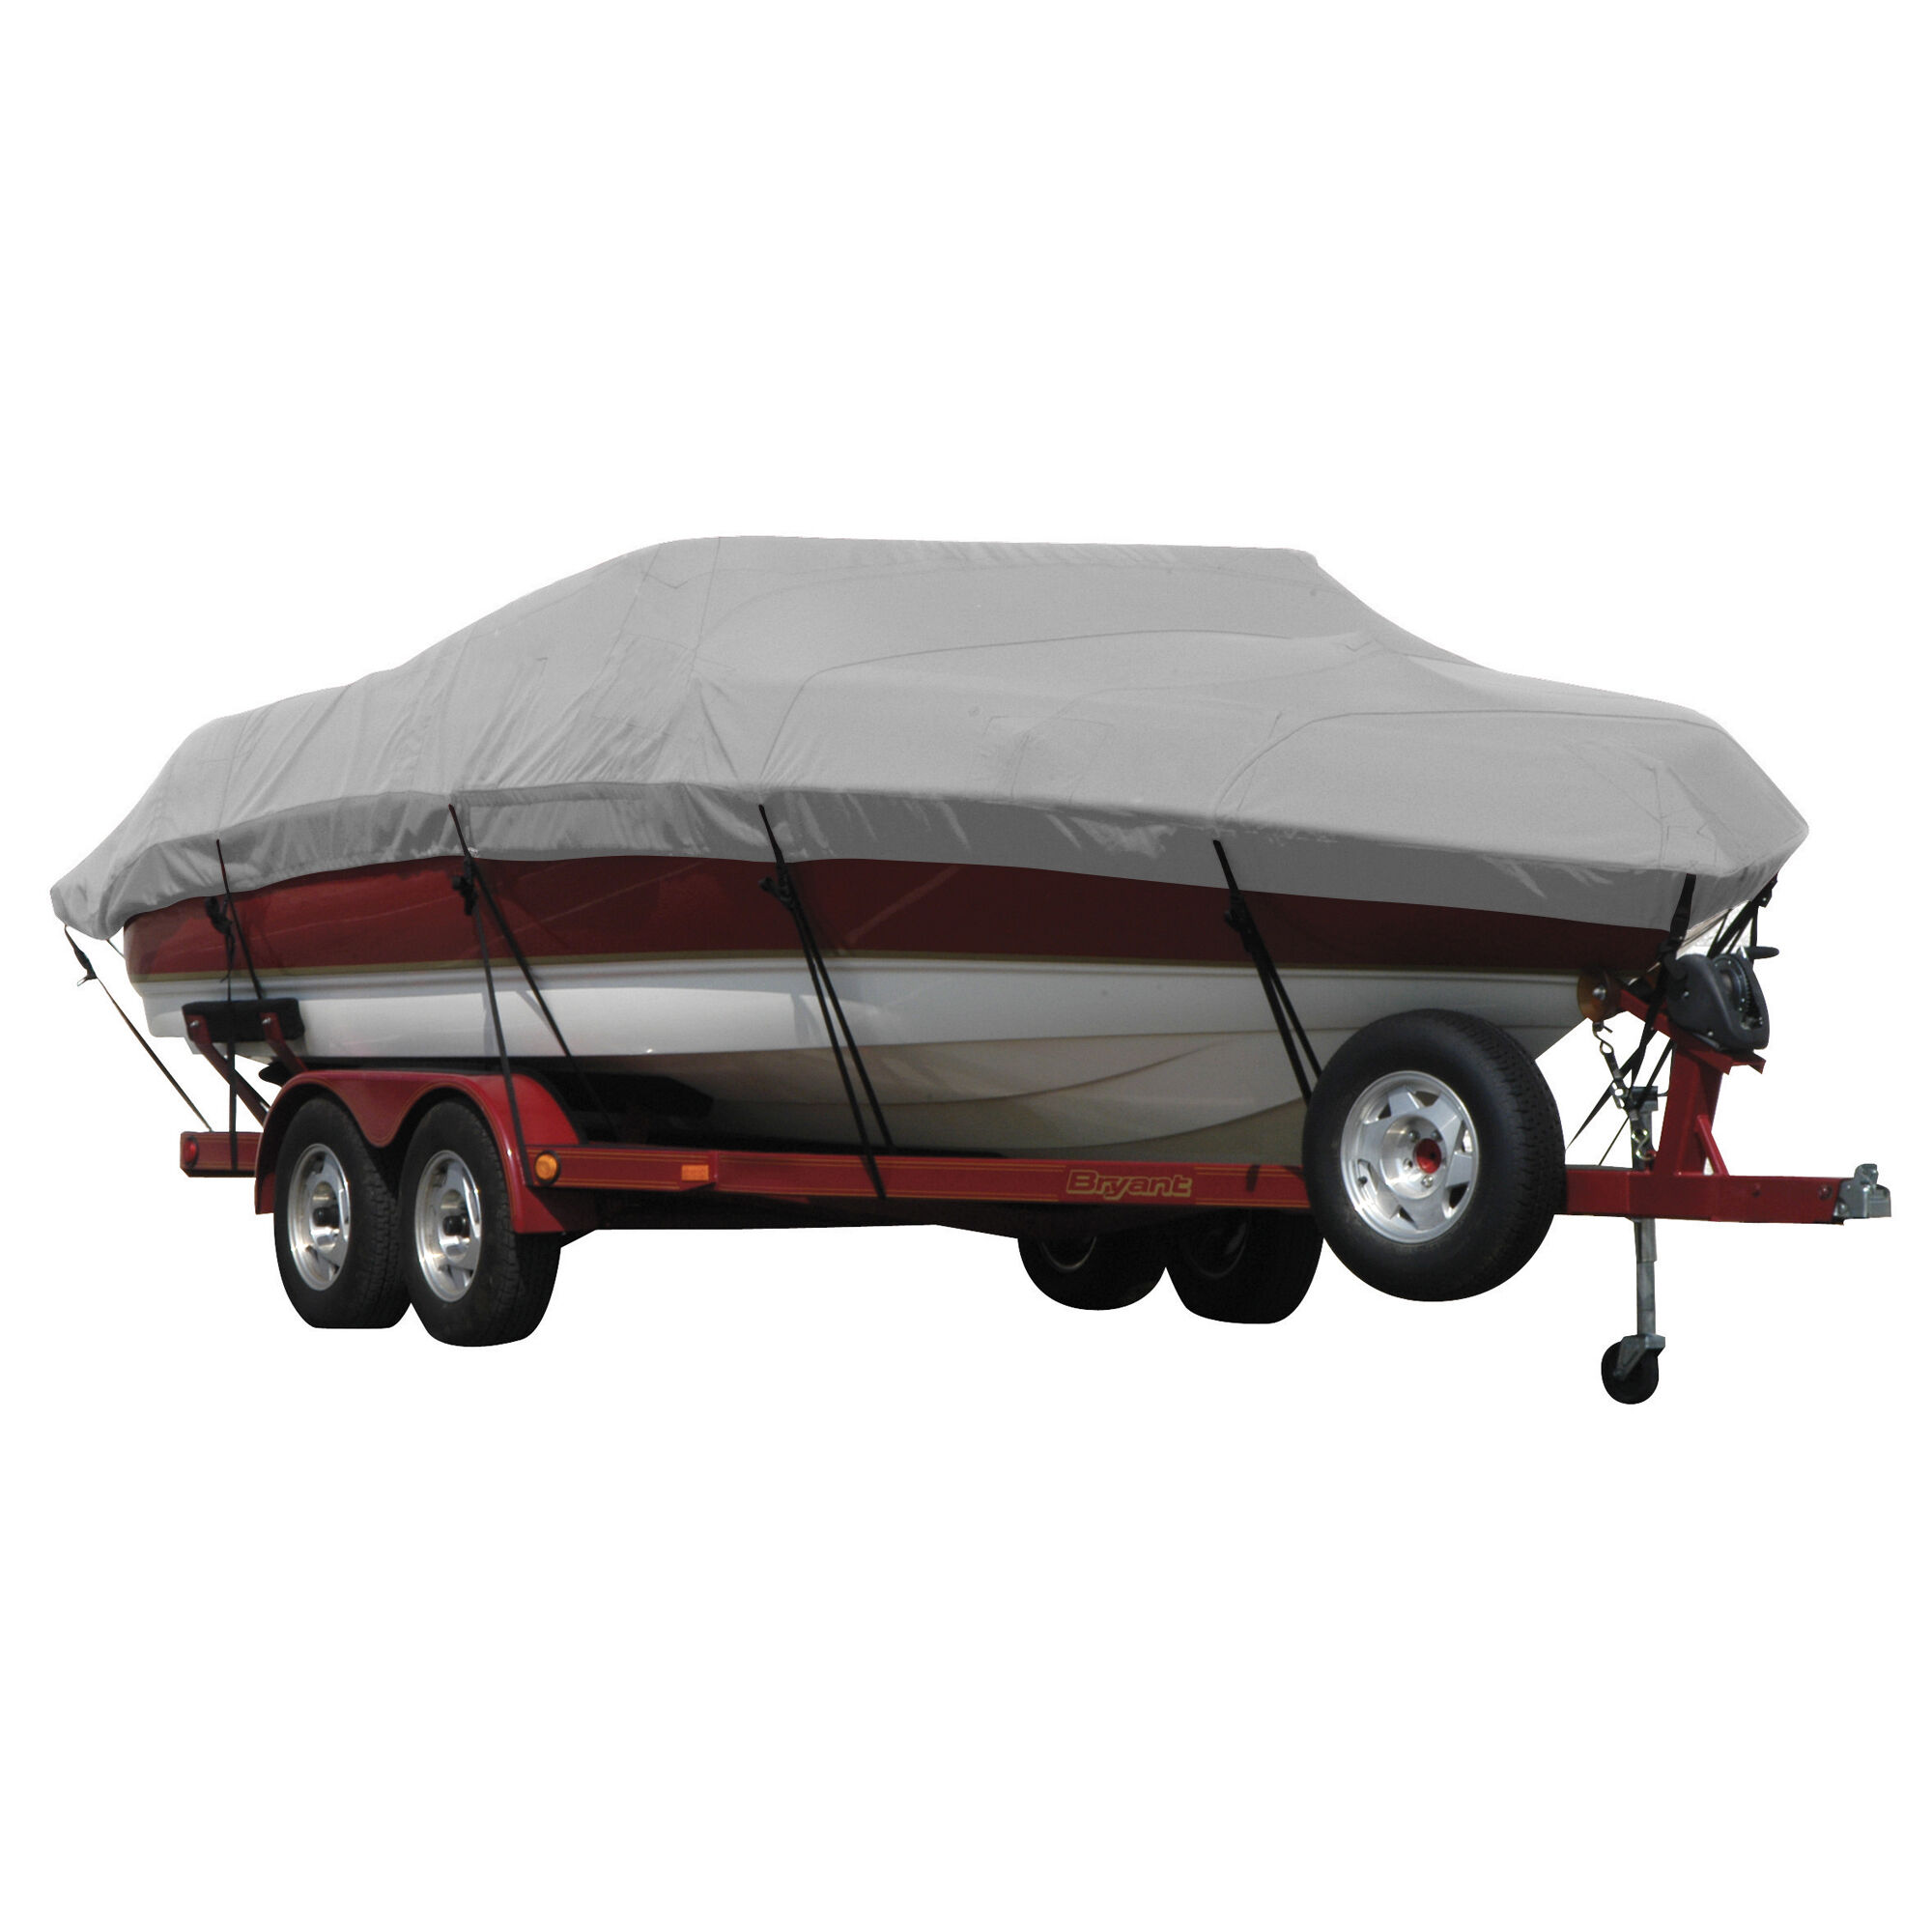 Covermate Exact Fit Sunbrella Boat Cover for Campion Chase 910 Zri Chase 910 Zri Cc I/O. Grey